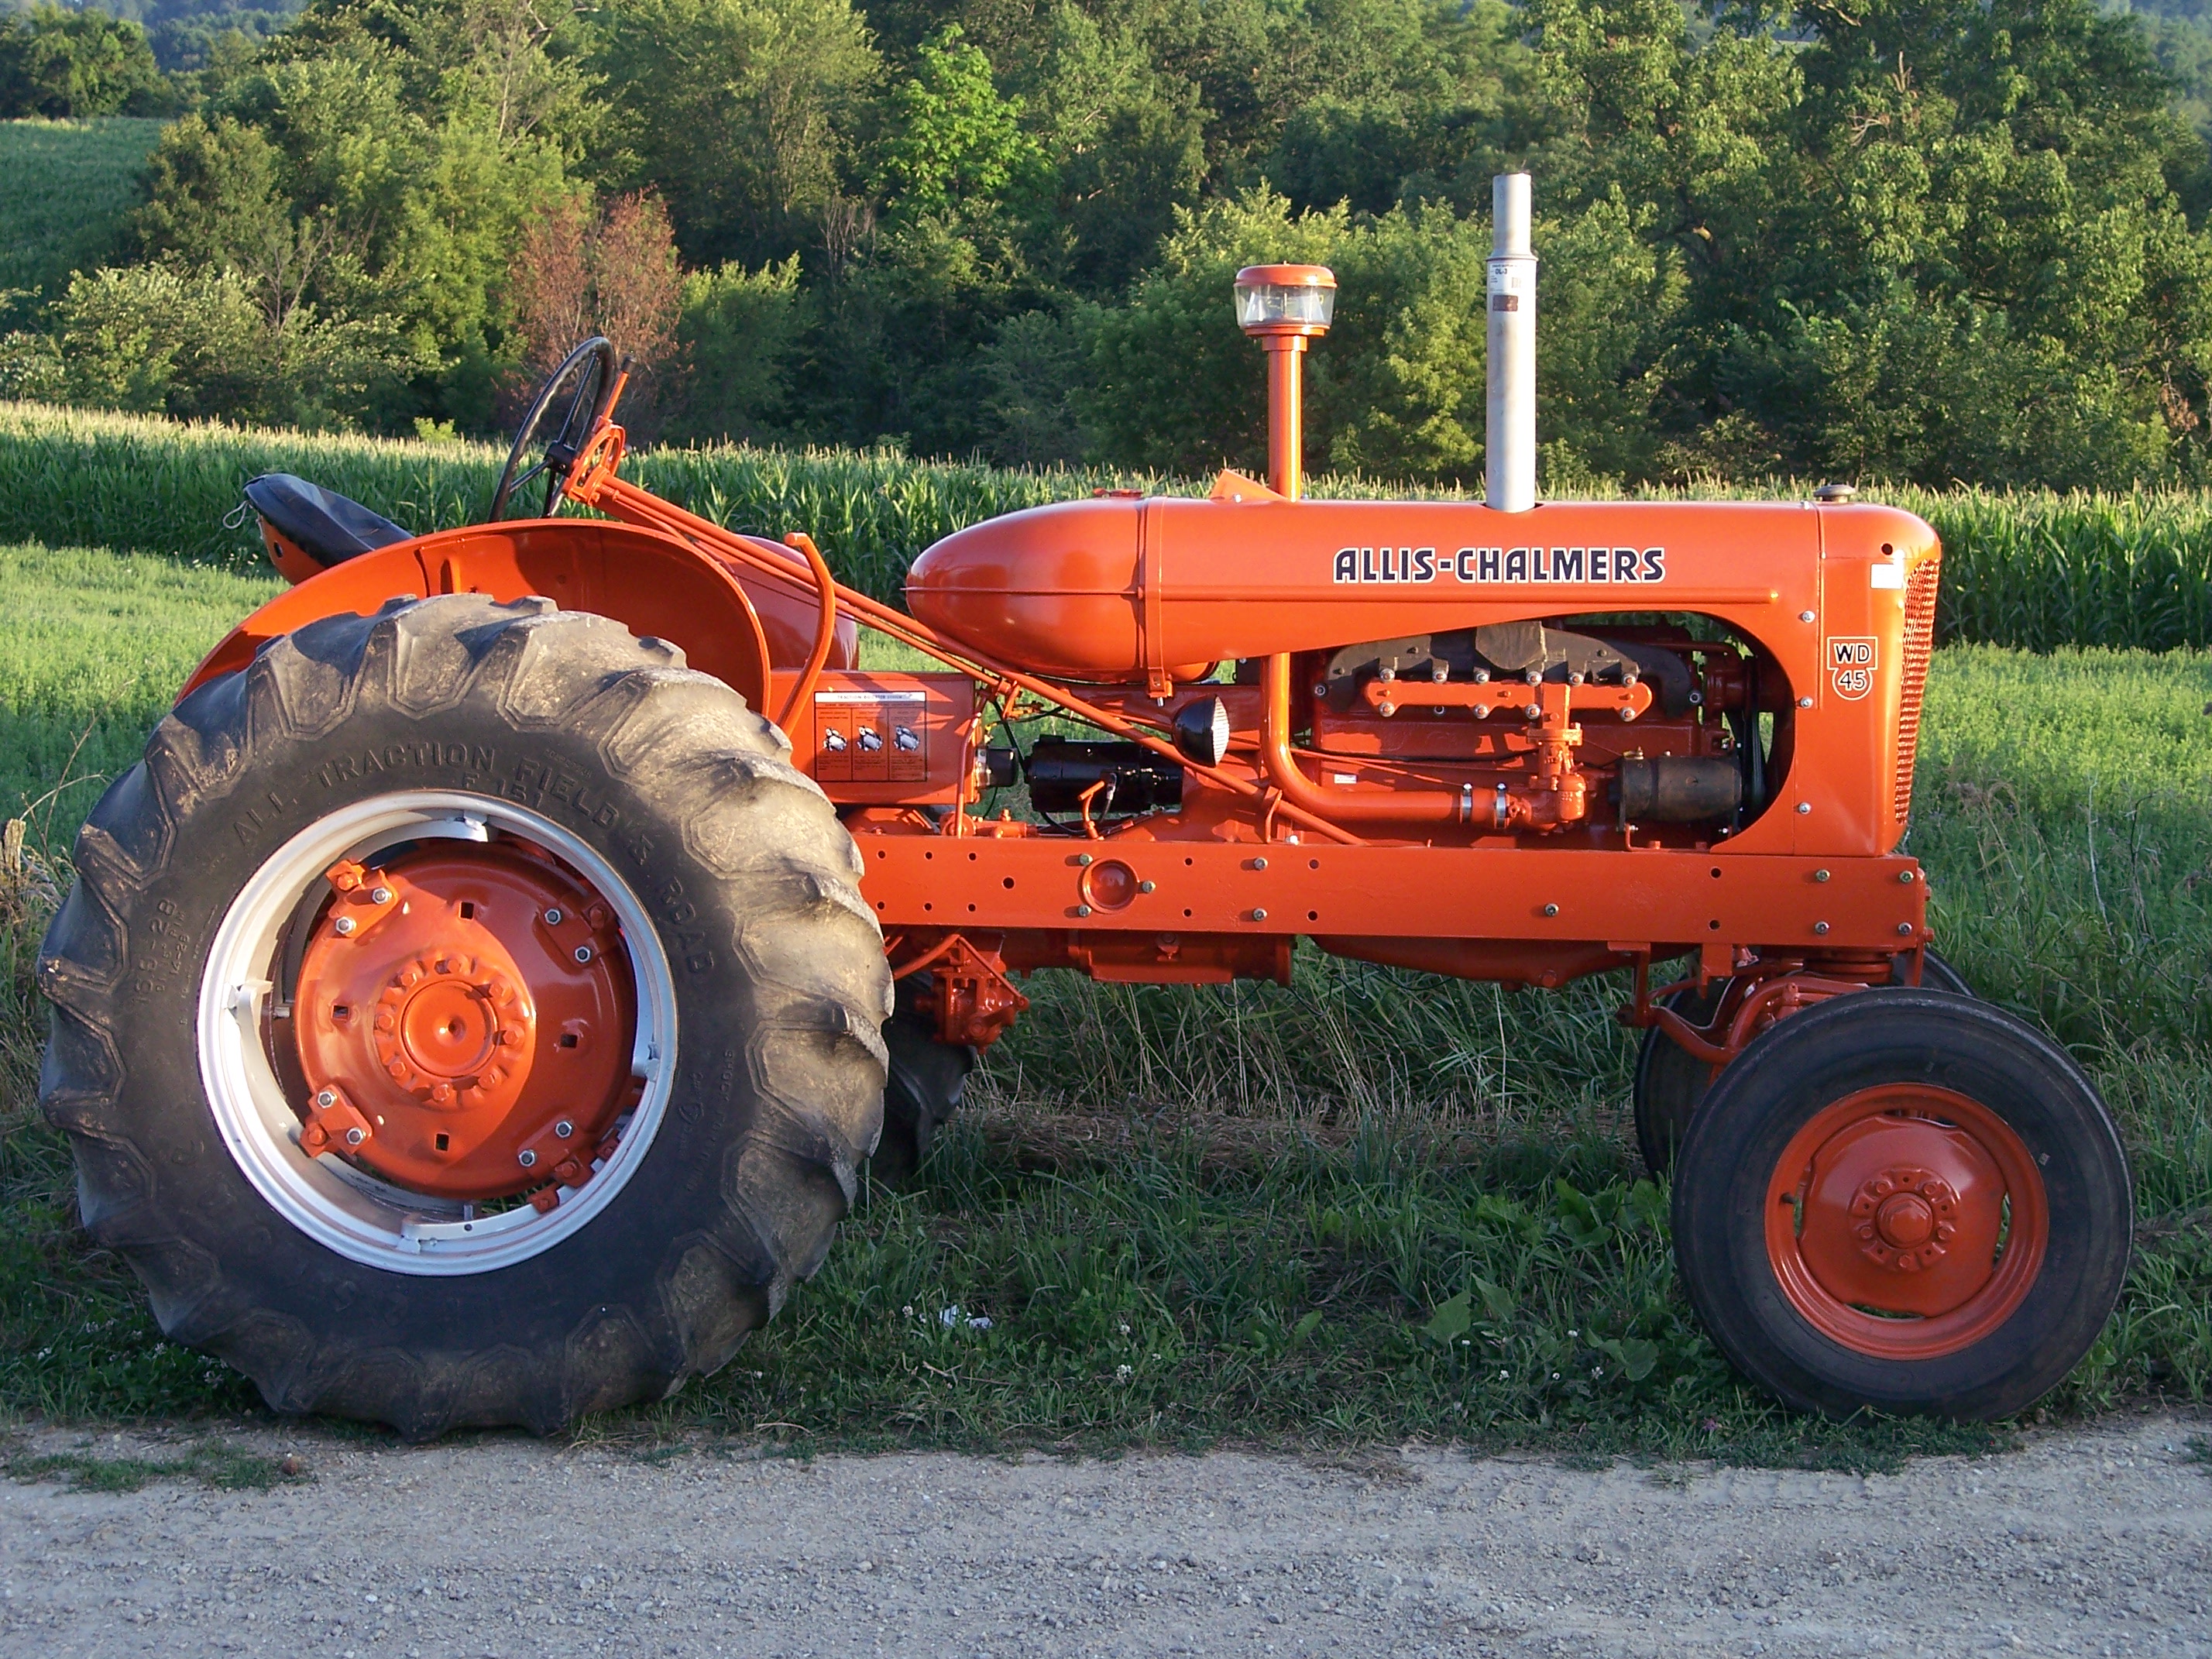 Allis Chalmers Wd 45 Pictures to pin on Pinterest